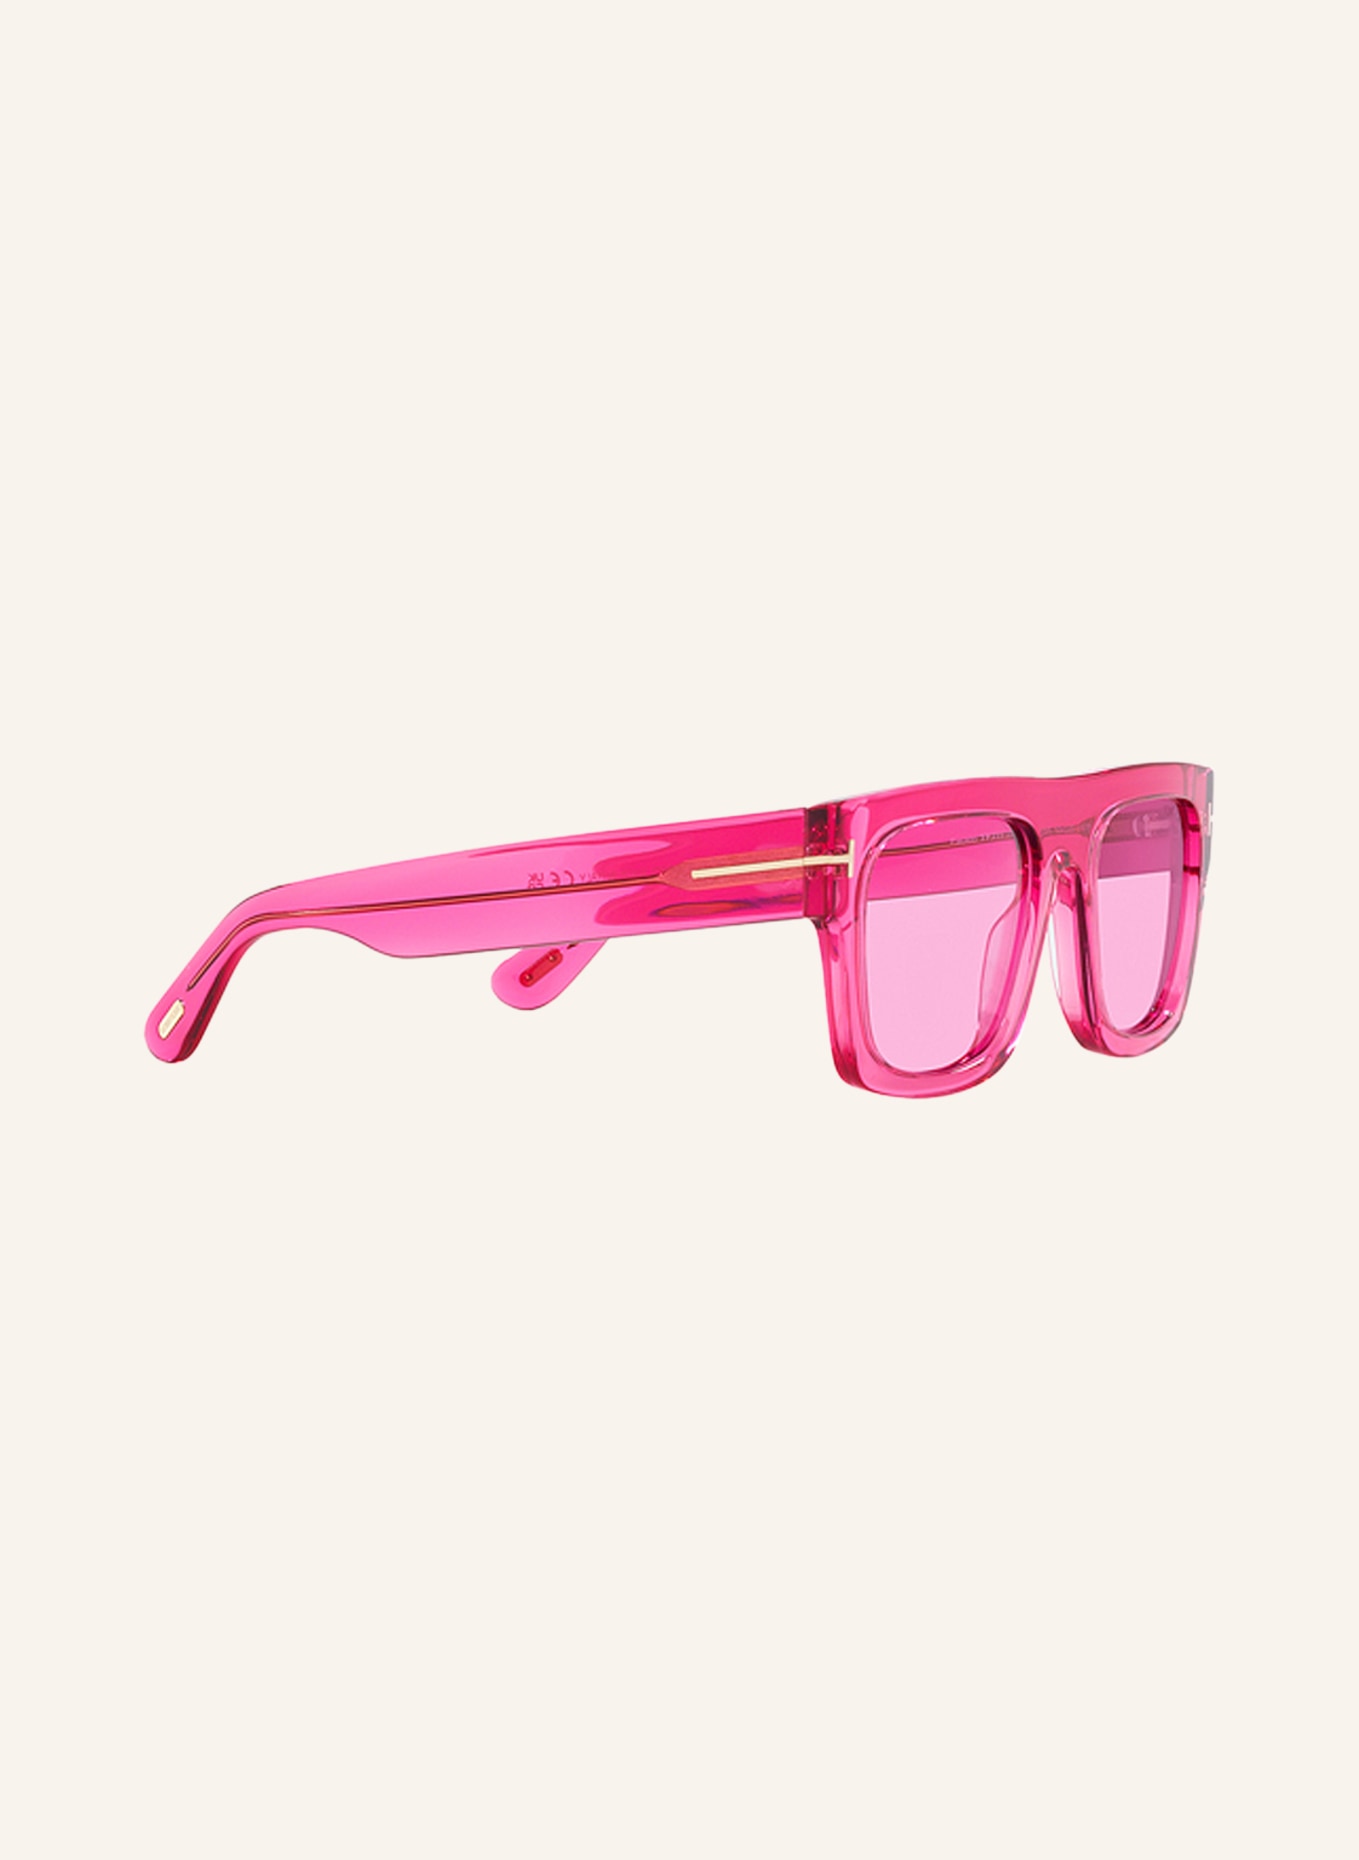 TOM FORD Sonnenbrille FT0711 FAUSTO, Farbe: 3500R1 - PINK/ PINK (Bild 3)